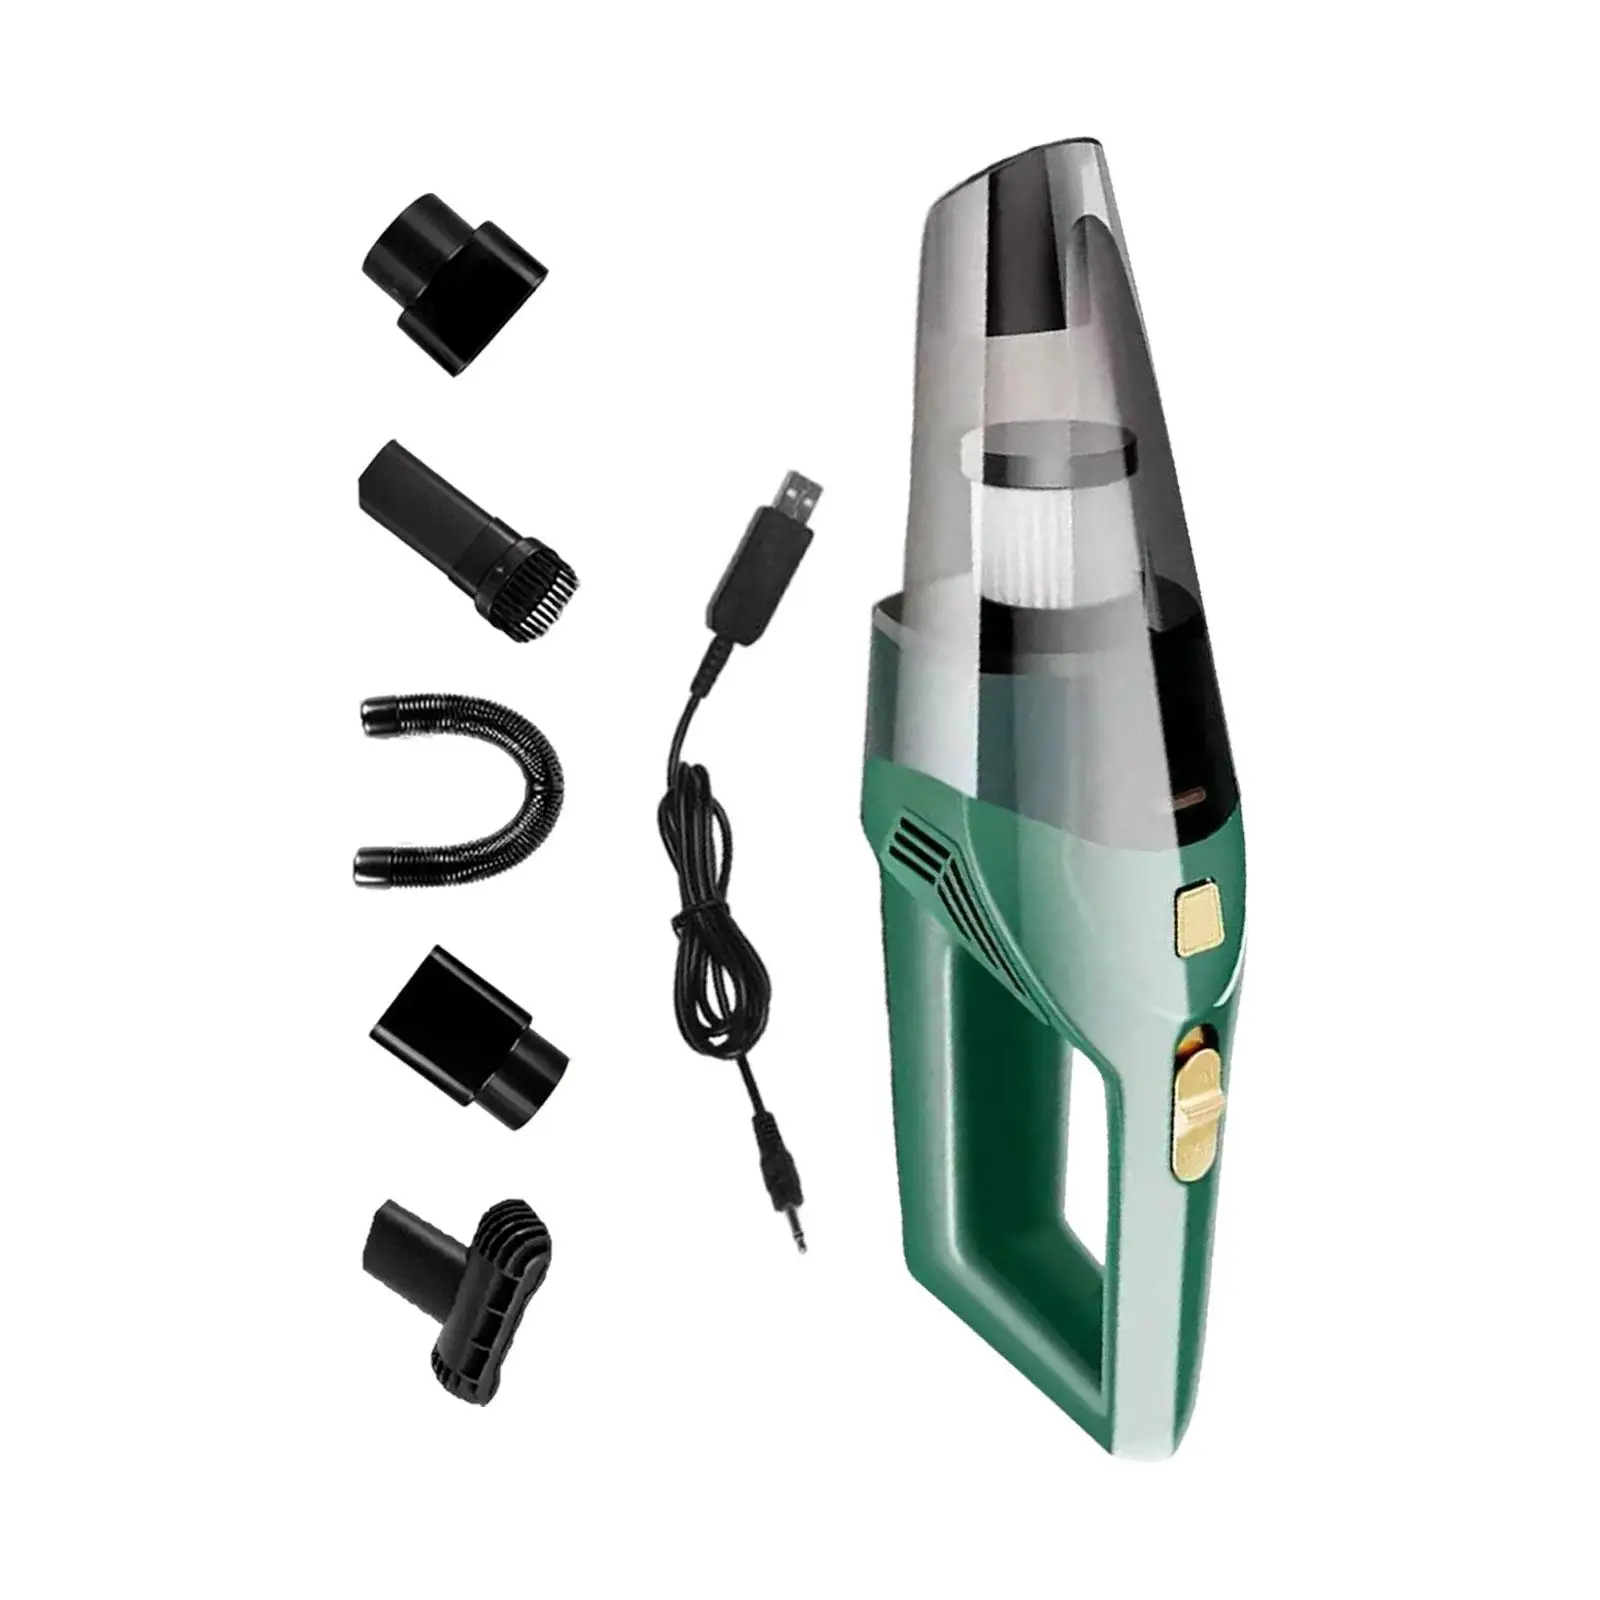 Handheld Car Vacuum Cleaner Powerful 12V Wet and Dry Using for Car Interior